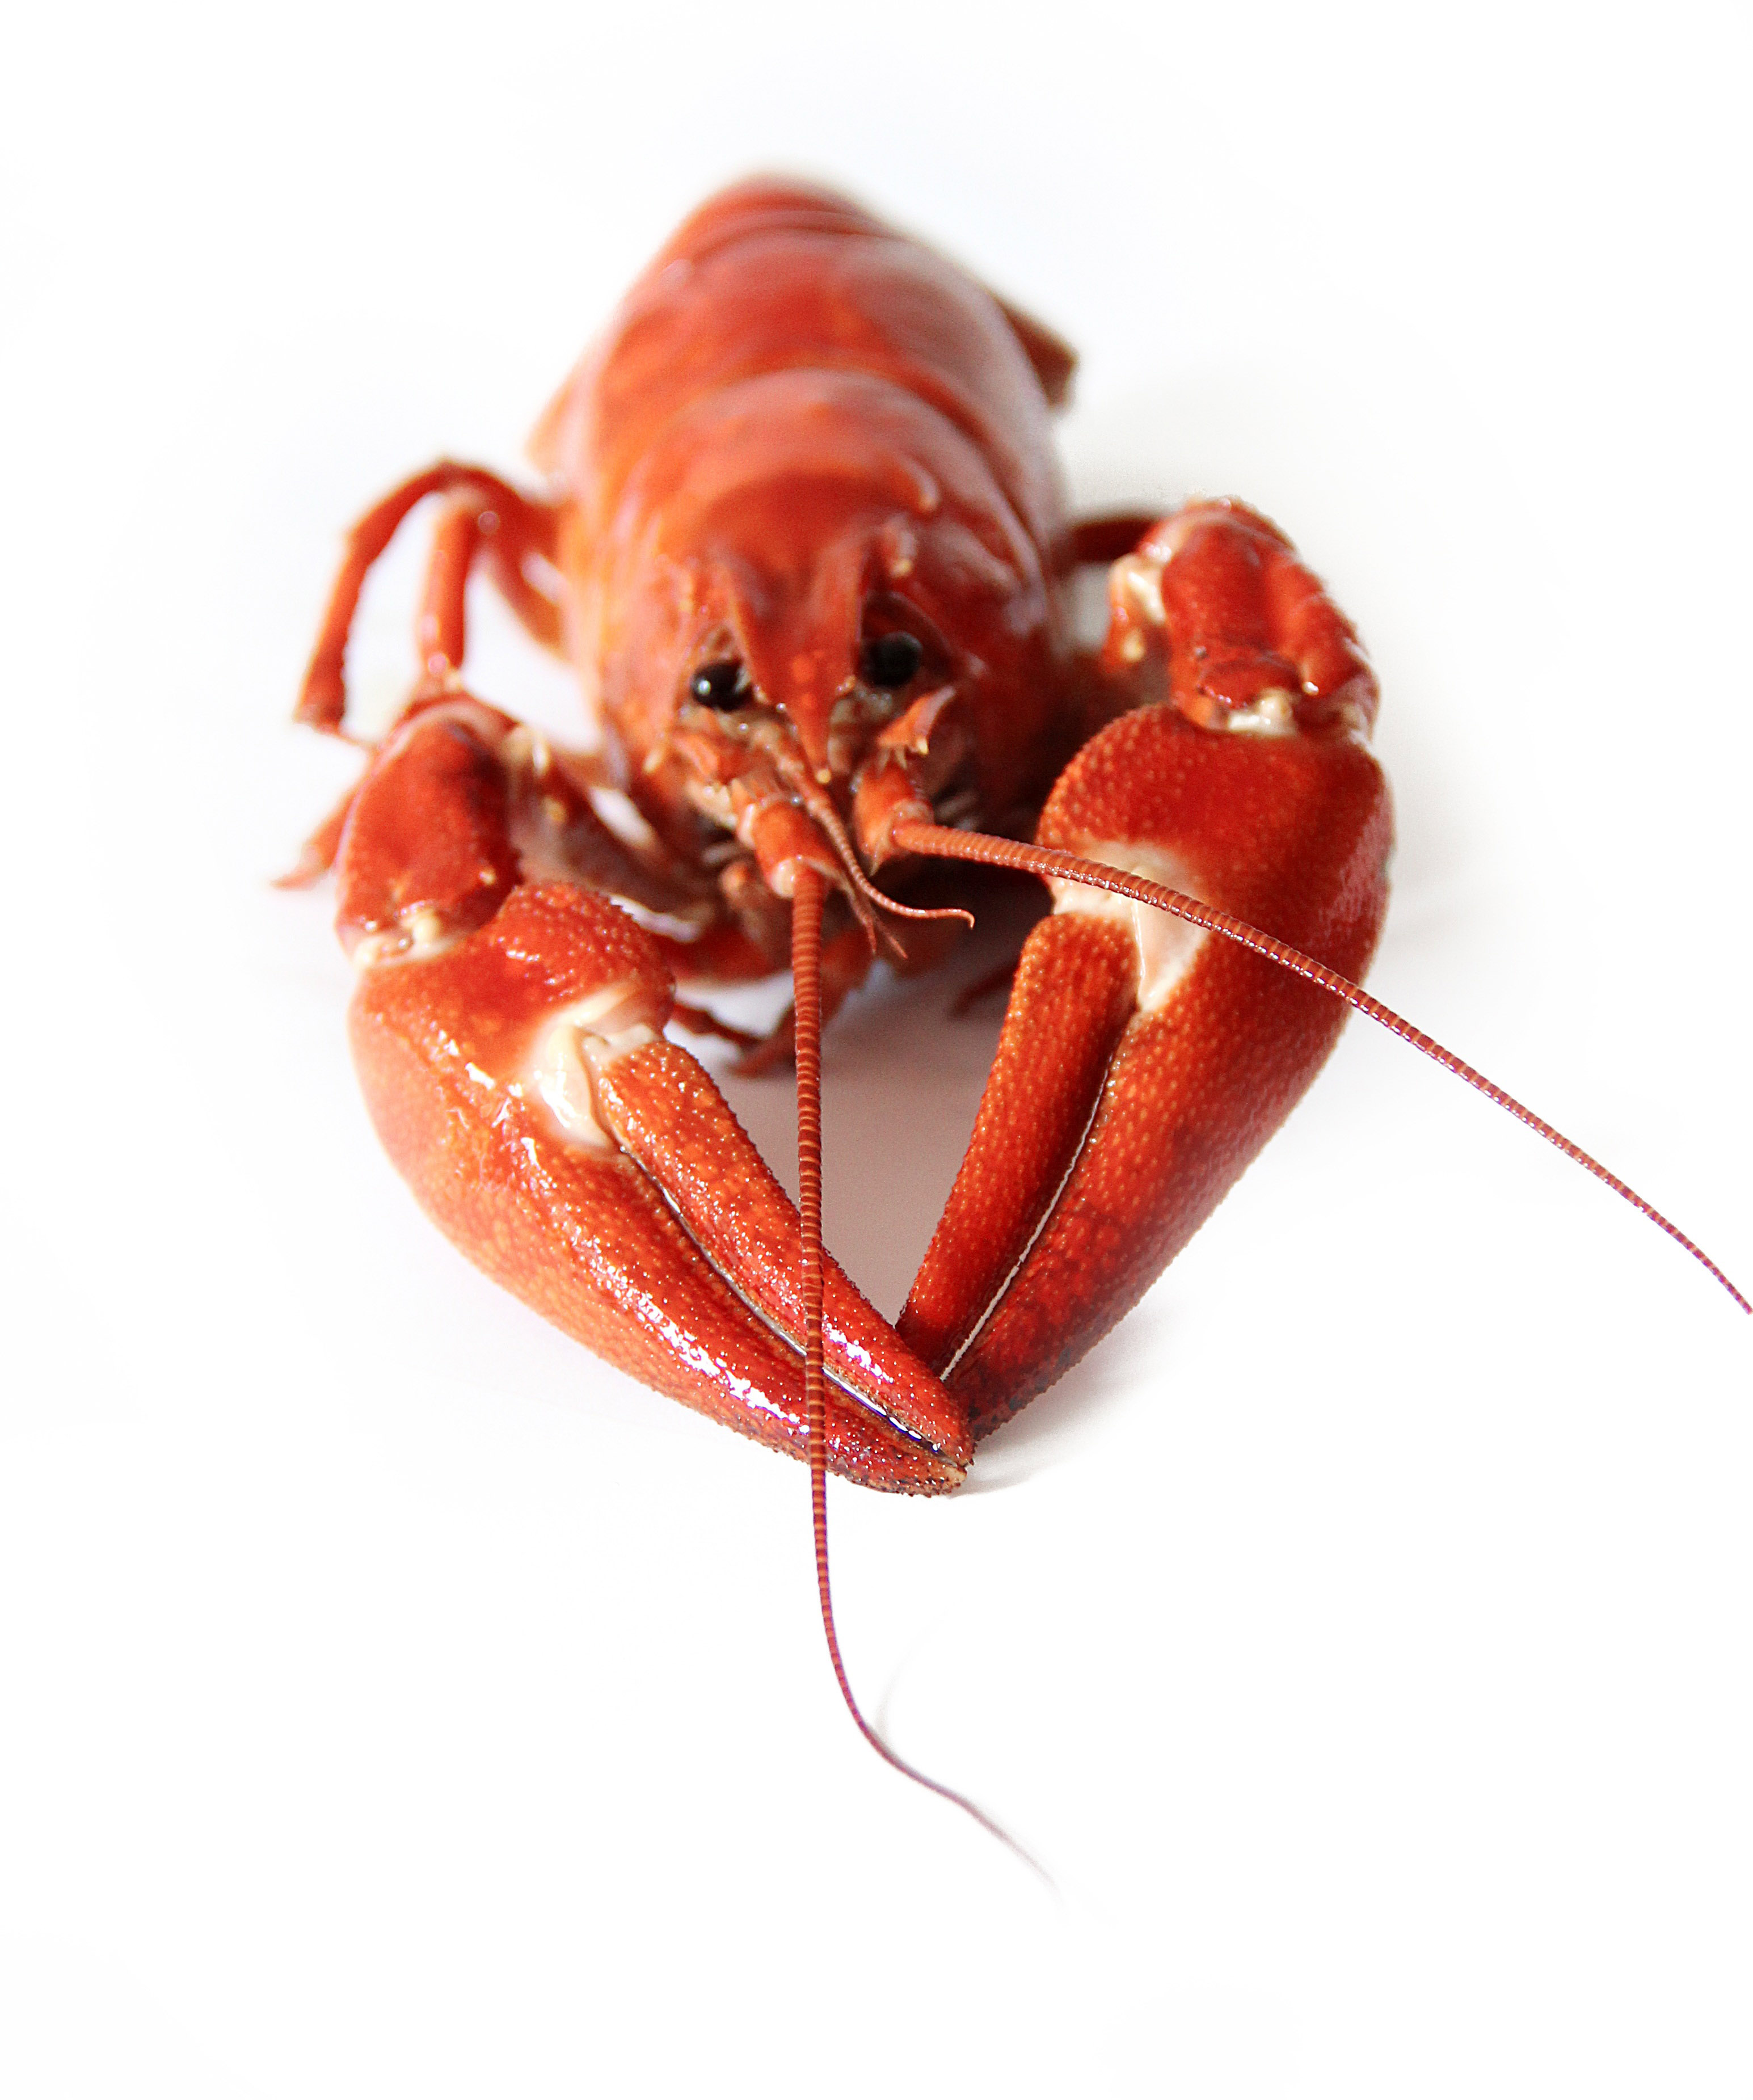 OPINION: Liberty for lobsters